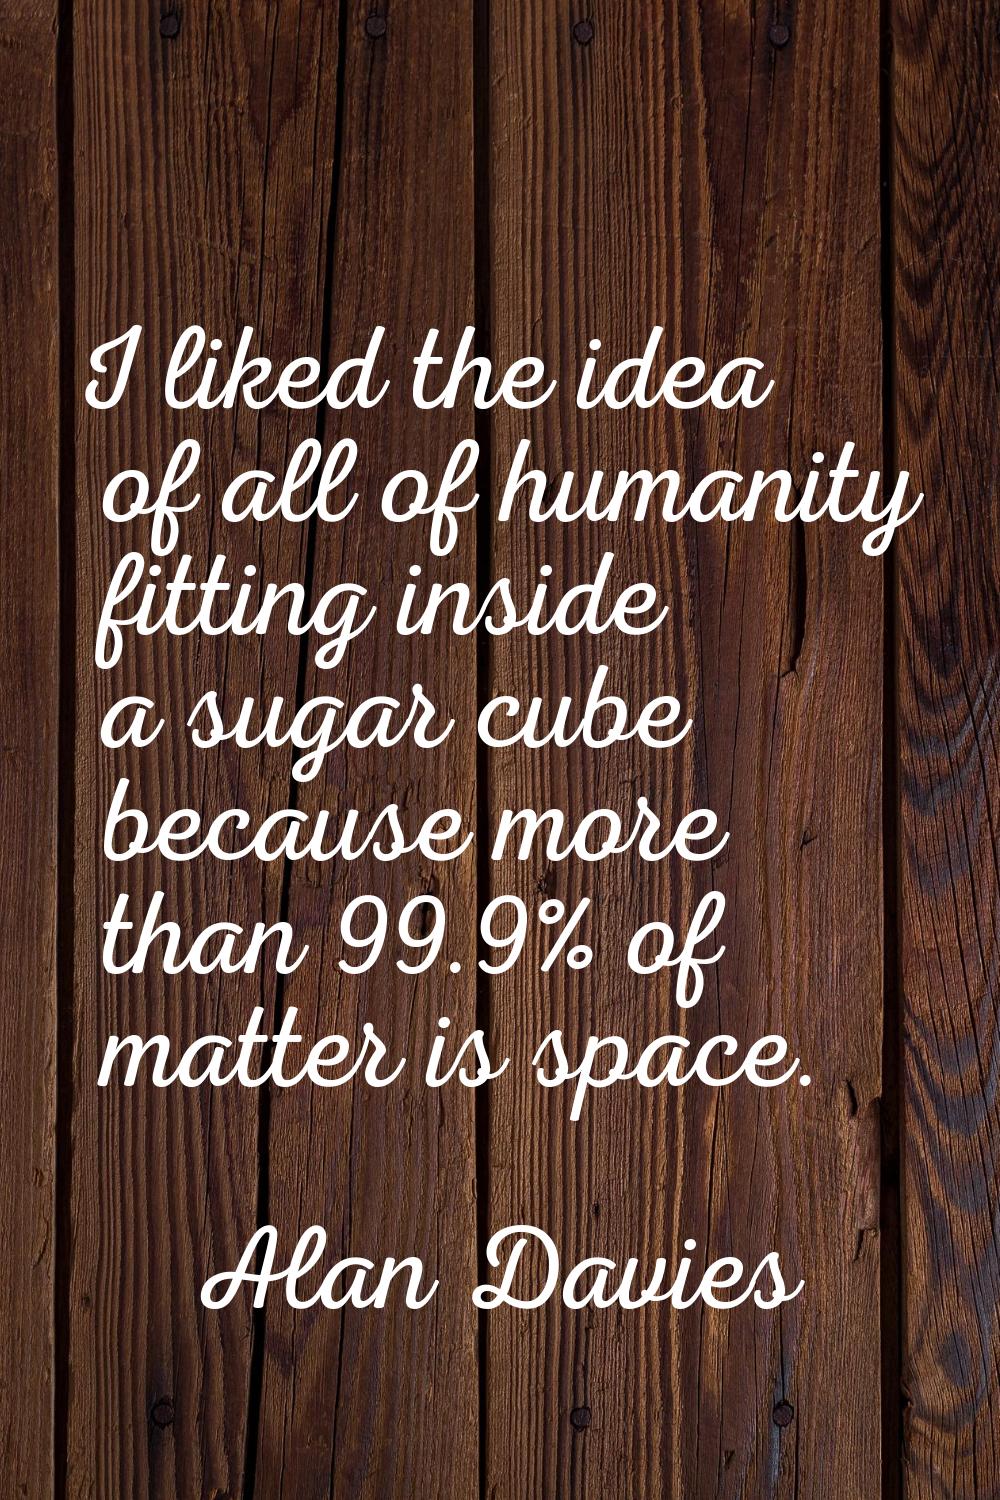 I liked the idea of all of humanity fitting inside a sugar cube because more than 99.9% of matter i